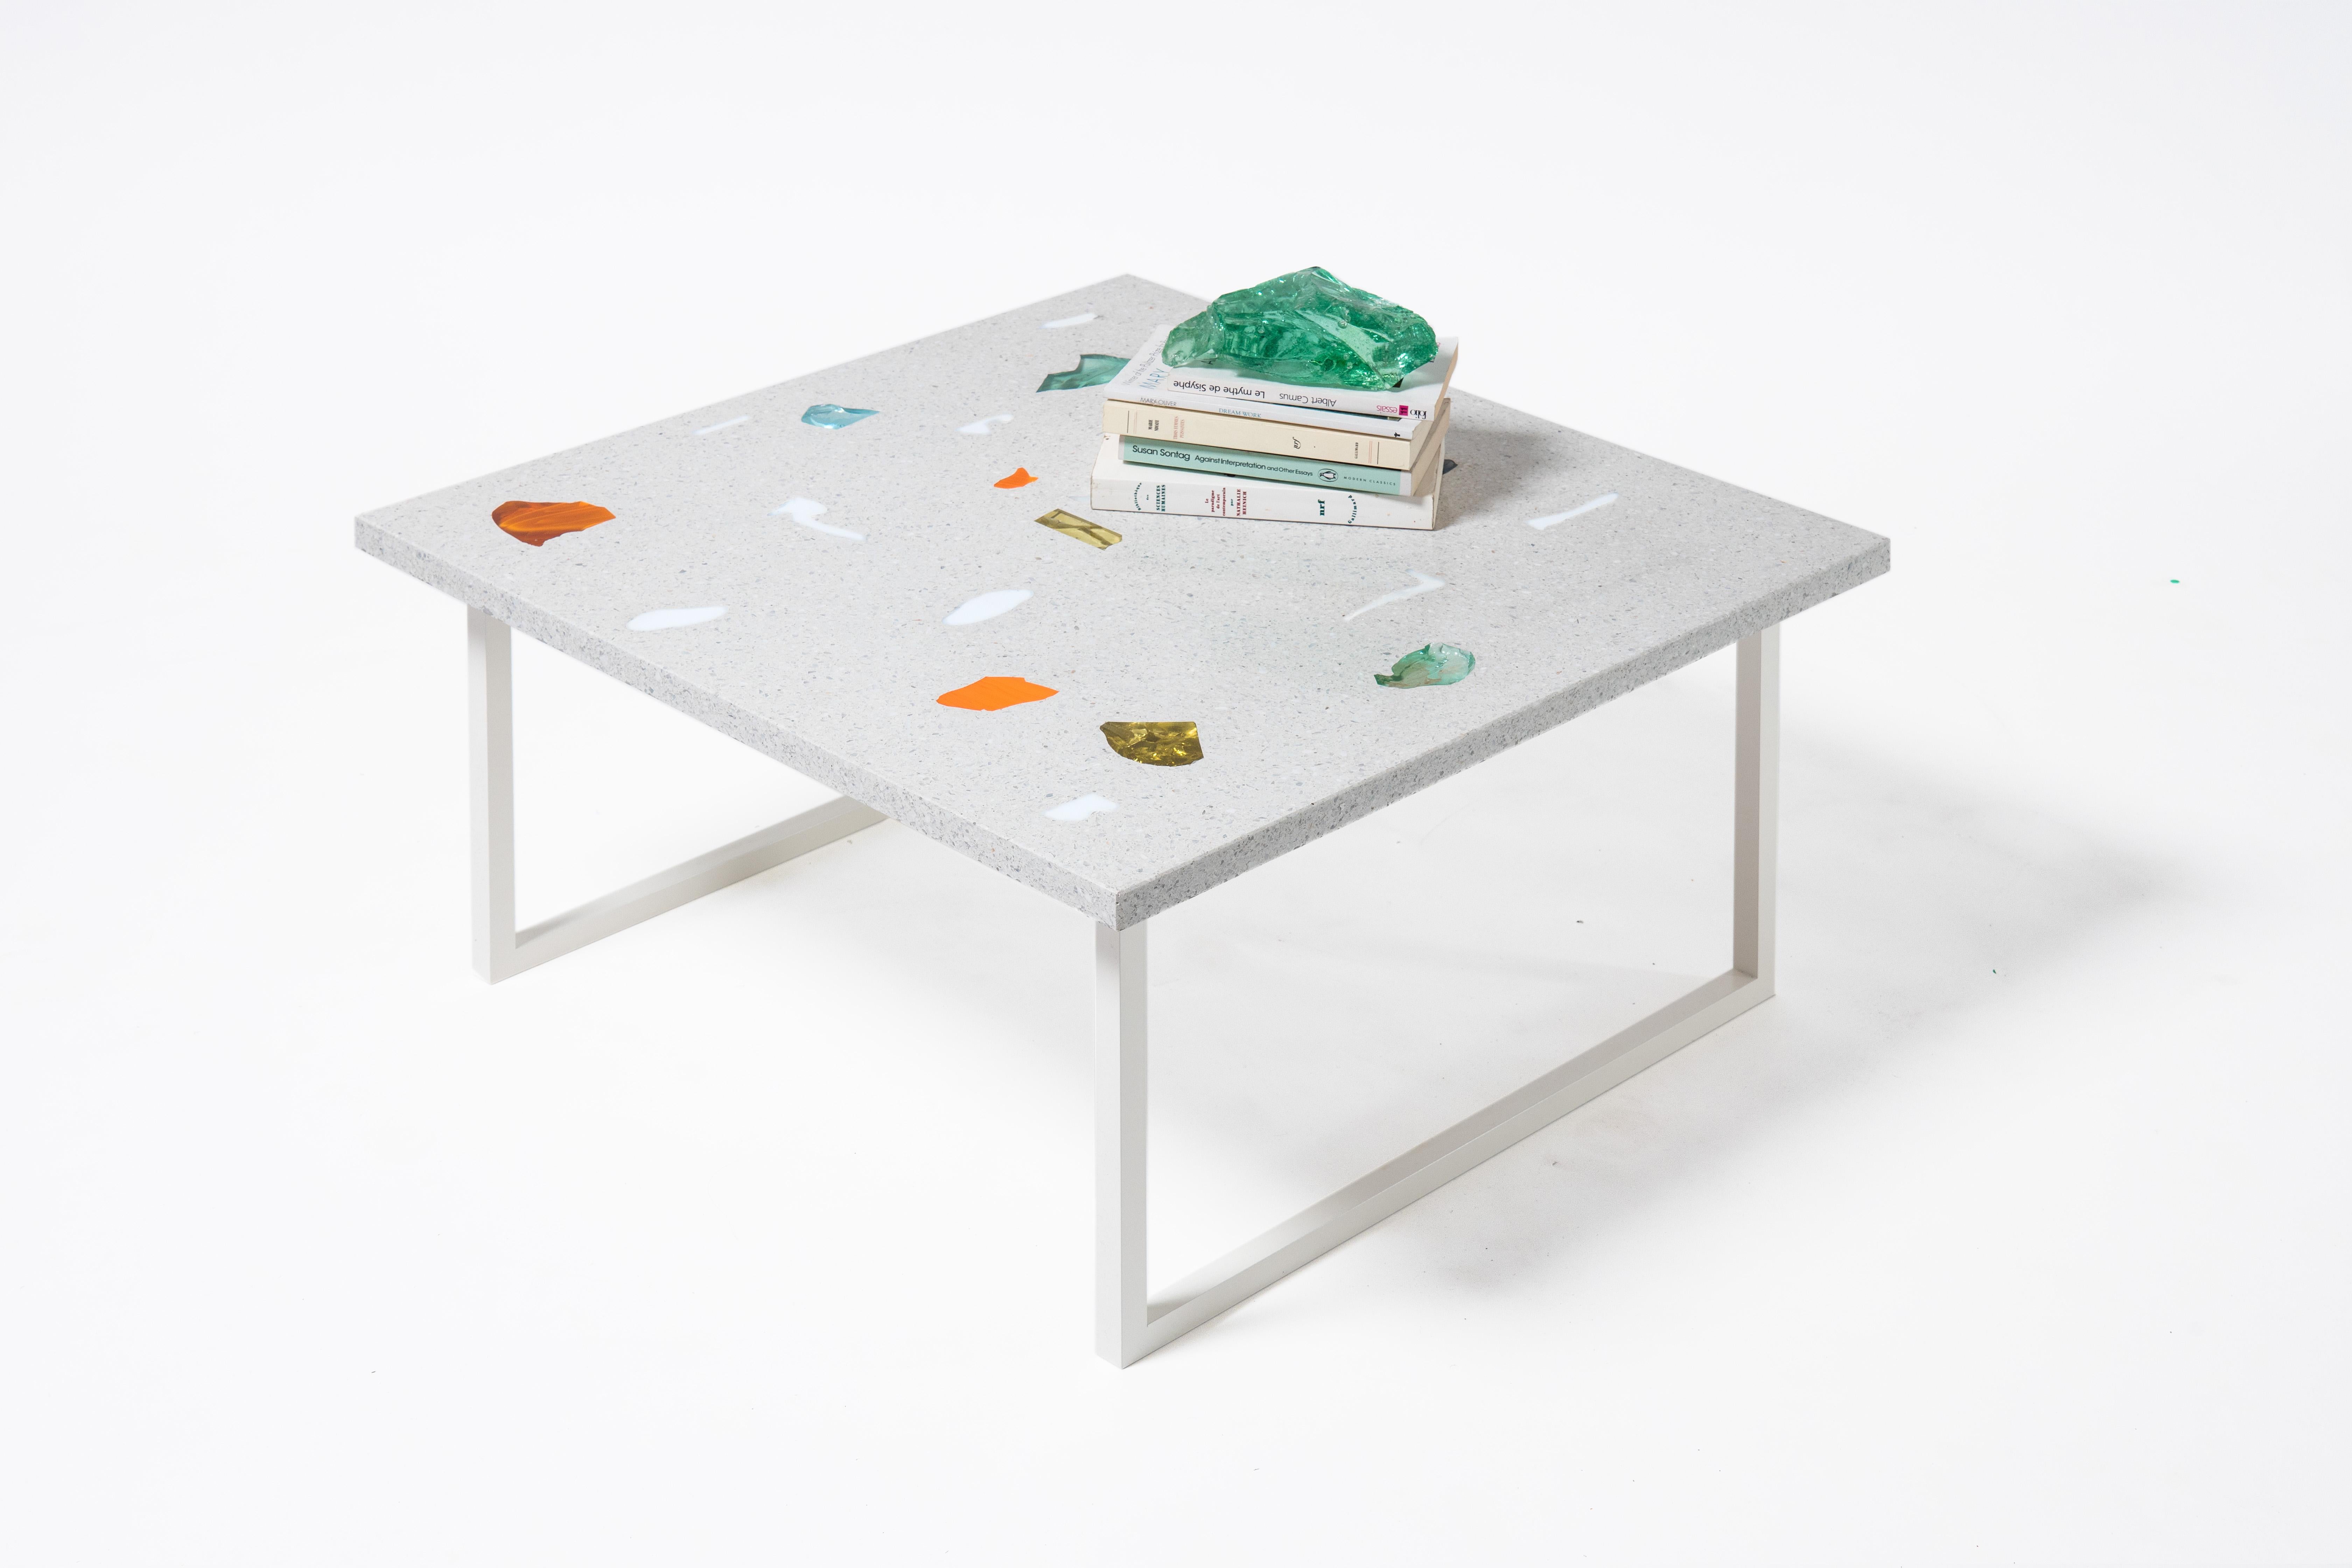 Basis Rho coffee table by Studio Jeschkelanger
Dimensions: 70 x 70 x 35 cm
Materials: unique Basis Rho tabletop: lluminated glass, colored concrete
 Powder coated steel frame, Handcrafted

Basis Rho was developed by Studio Jeschkelanger. It is